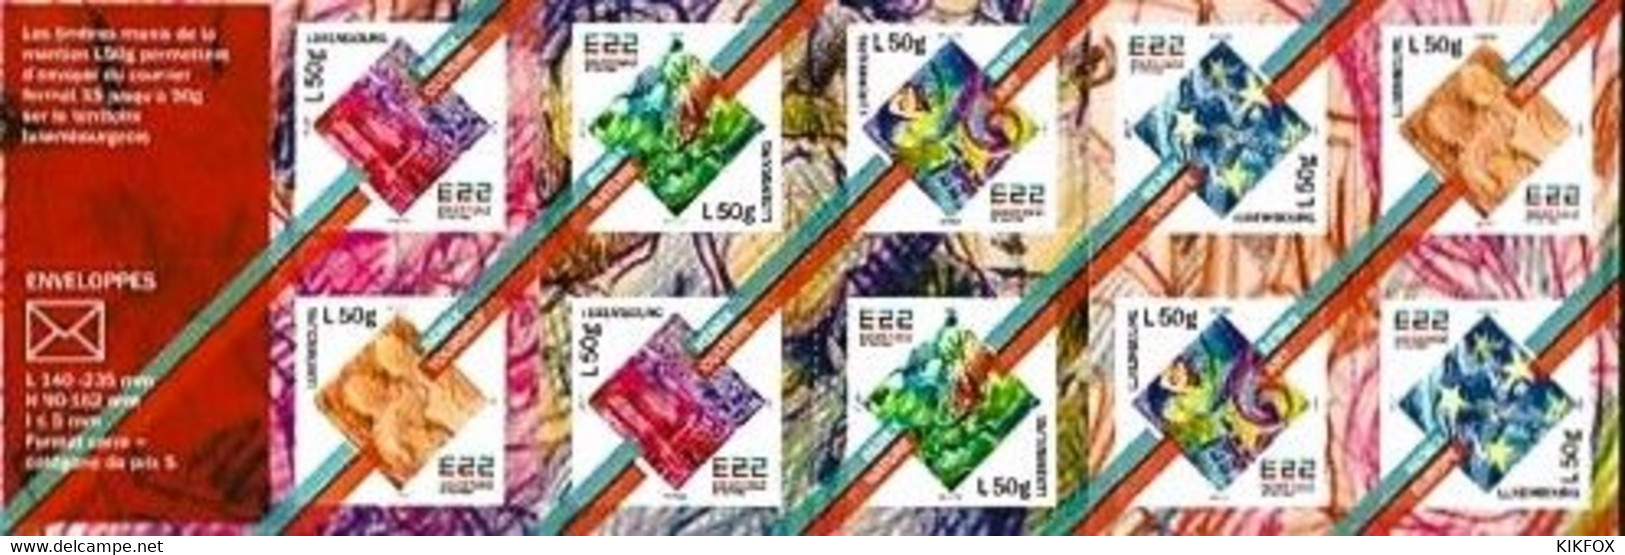 Luxembourg 2022  MH ,CARNET MI 2291 - 2295, Remixing Culture E22- Stamp Booklet L50g  , POSTFRISCH, NEUF - Booklets